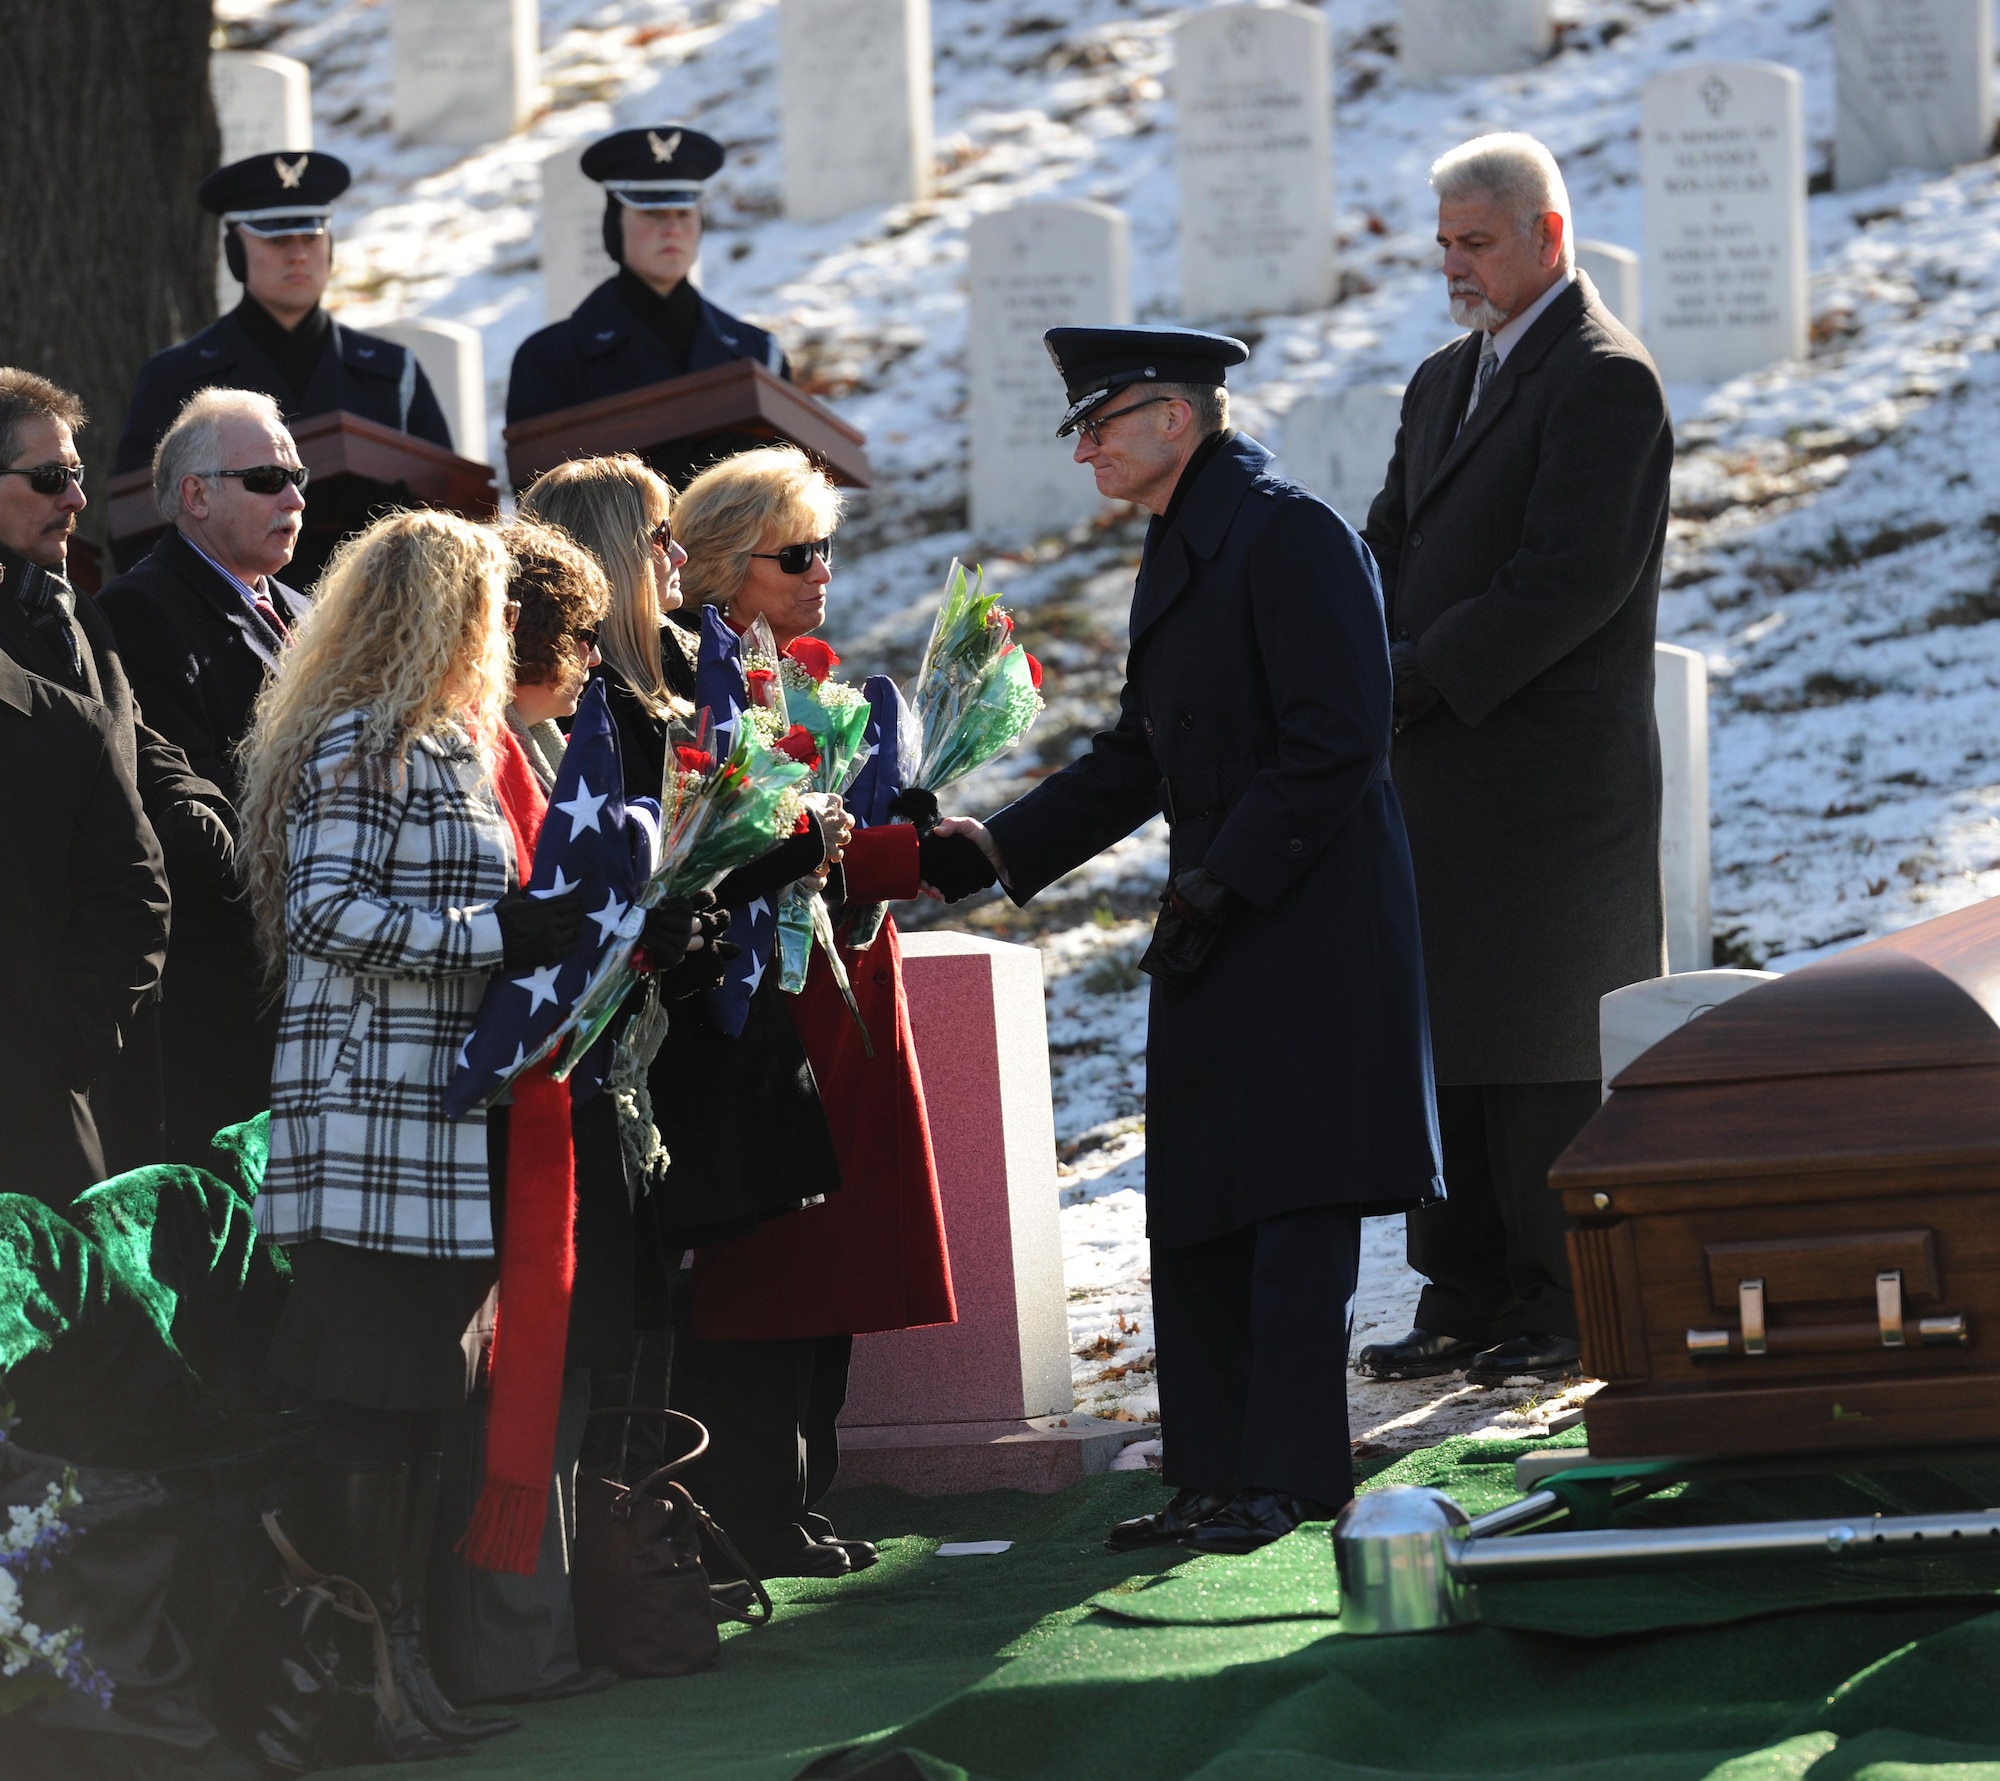 Family and friends of Col. Francis J. McGouldrick Jr. pay tribute to him as he is laid to rest Dec. 13, 2013, at Arlington National Cemetery, Va. McGouldrick was missing in action since 1968 when his plane collided with another plane. His remains were found in a remote jungle in Laos. (U.S. Air Force photo/Airman 1st Class Nesha Humes)
